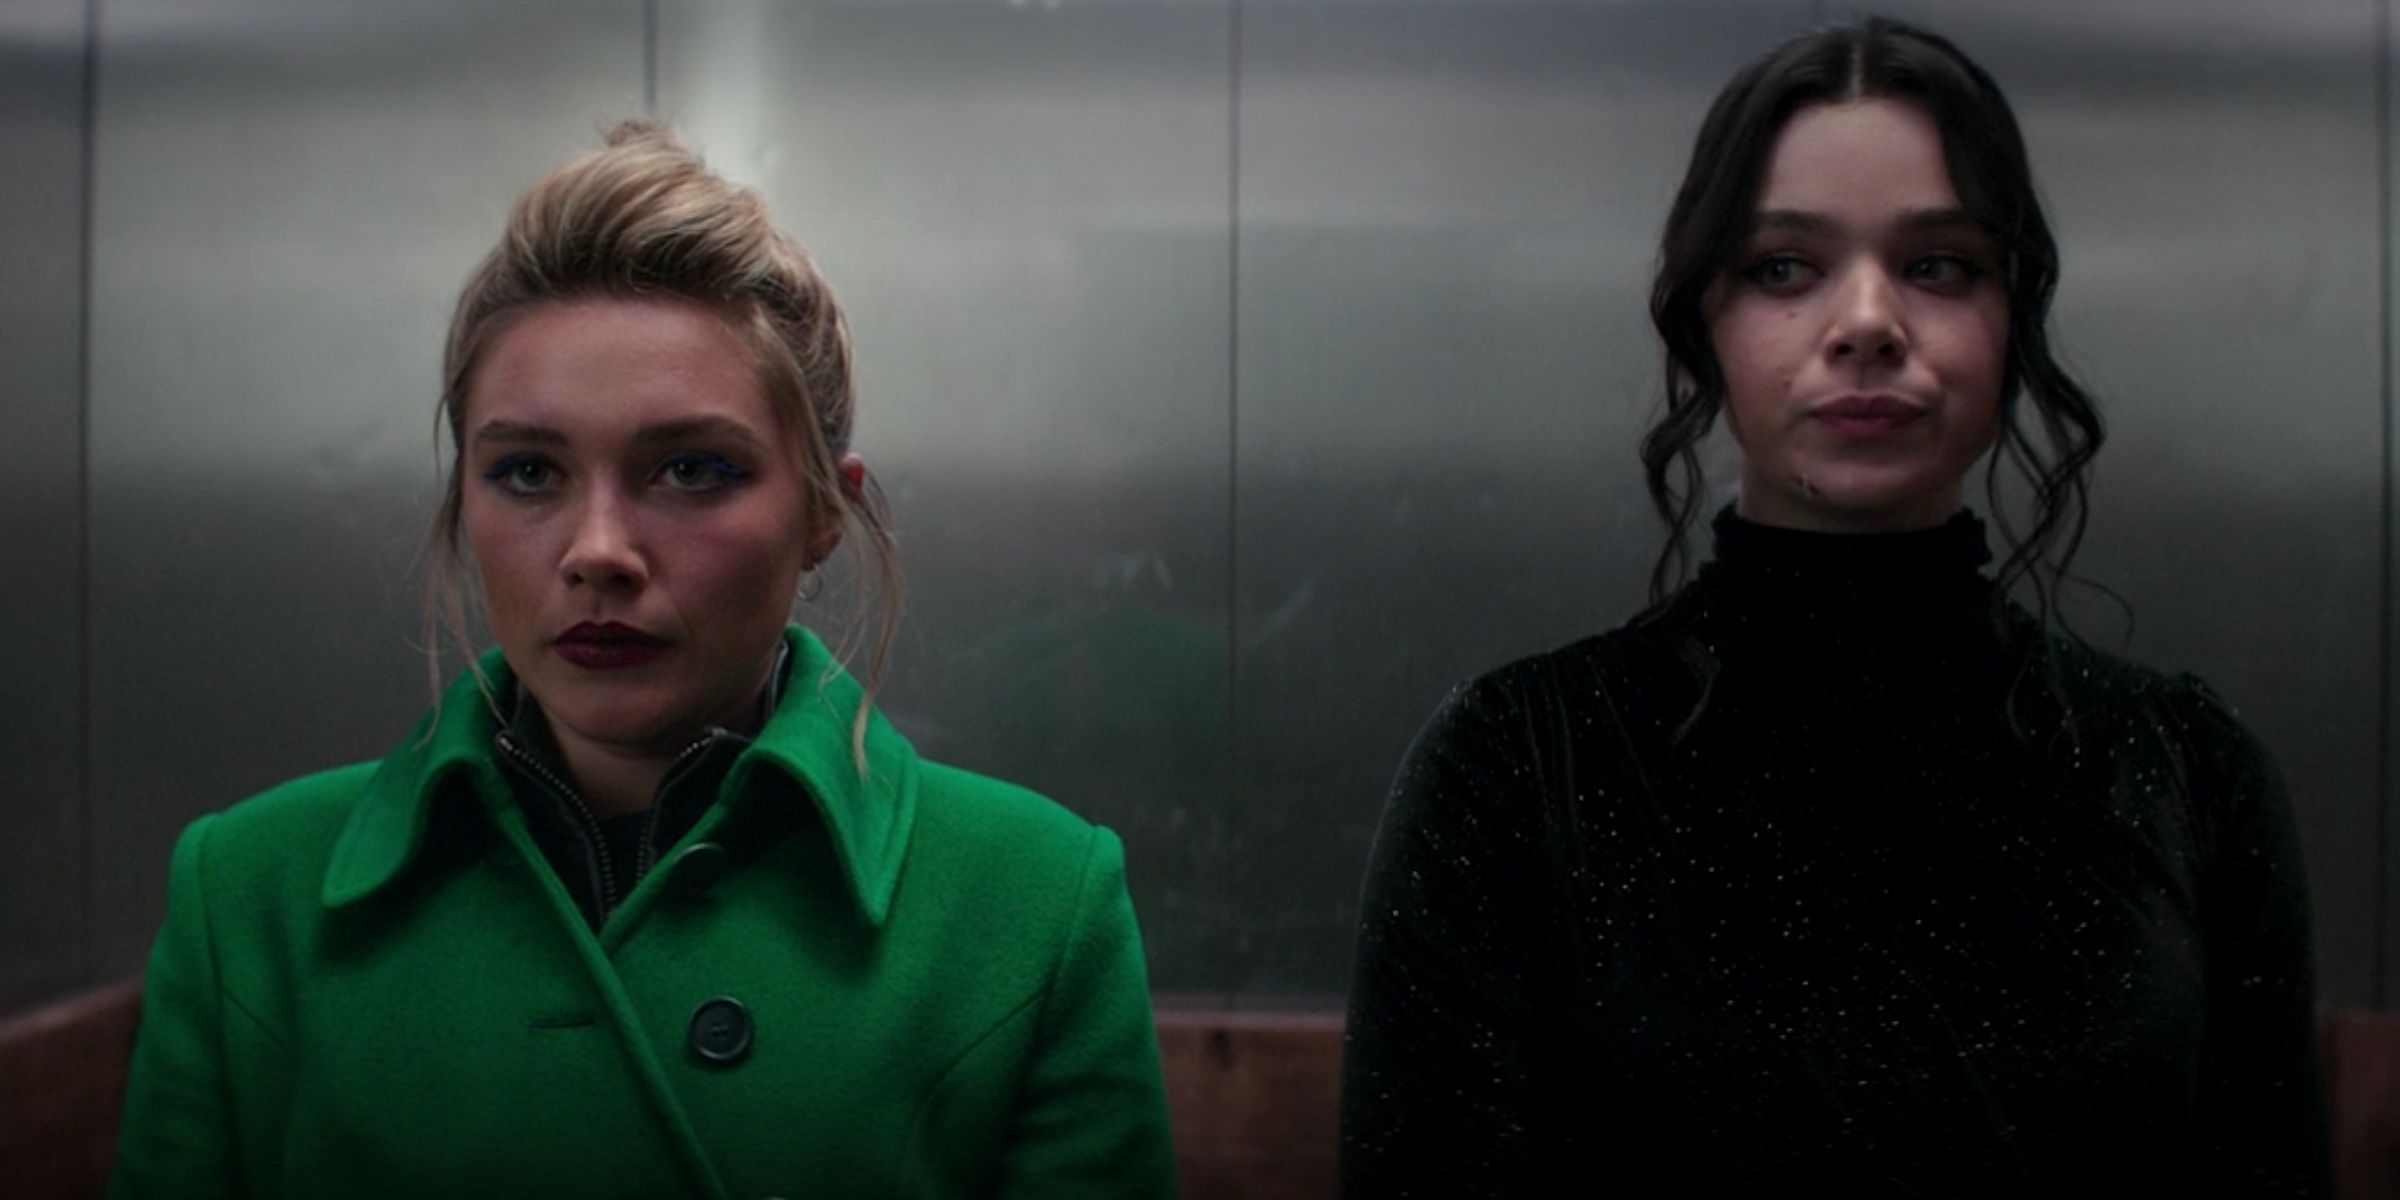 Yelena Belova (Florence Pugh) and Kate Bishop (Hailee Steinfeld) standing next to each other in an elevator.